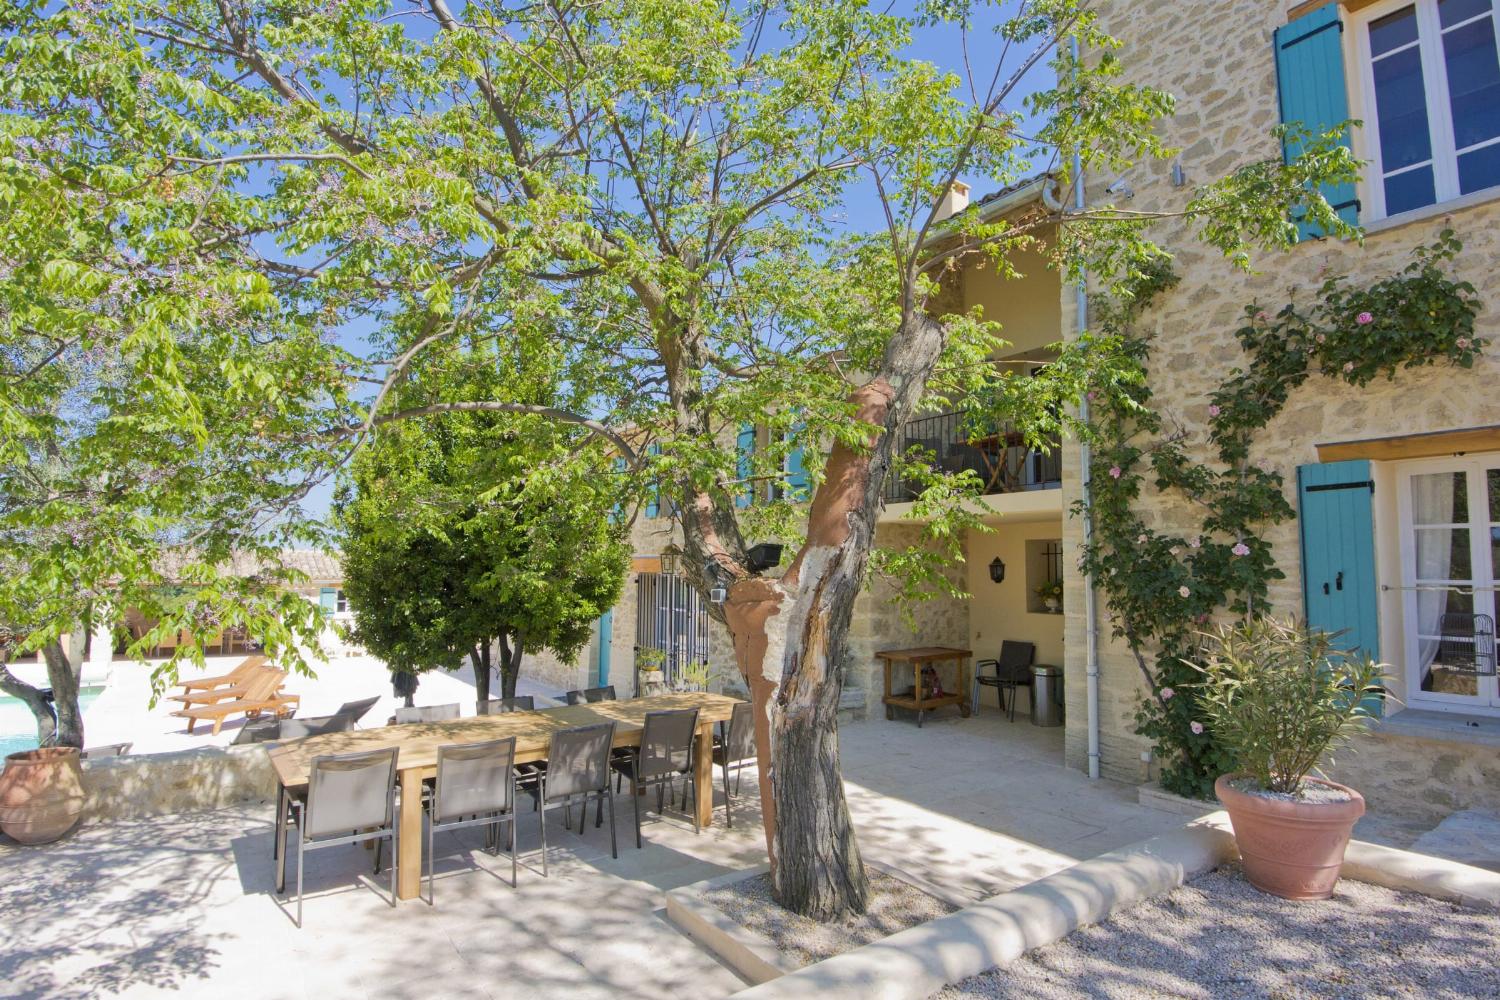 Rental accommodation in Provence